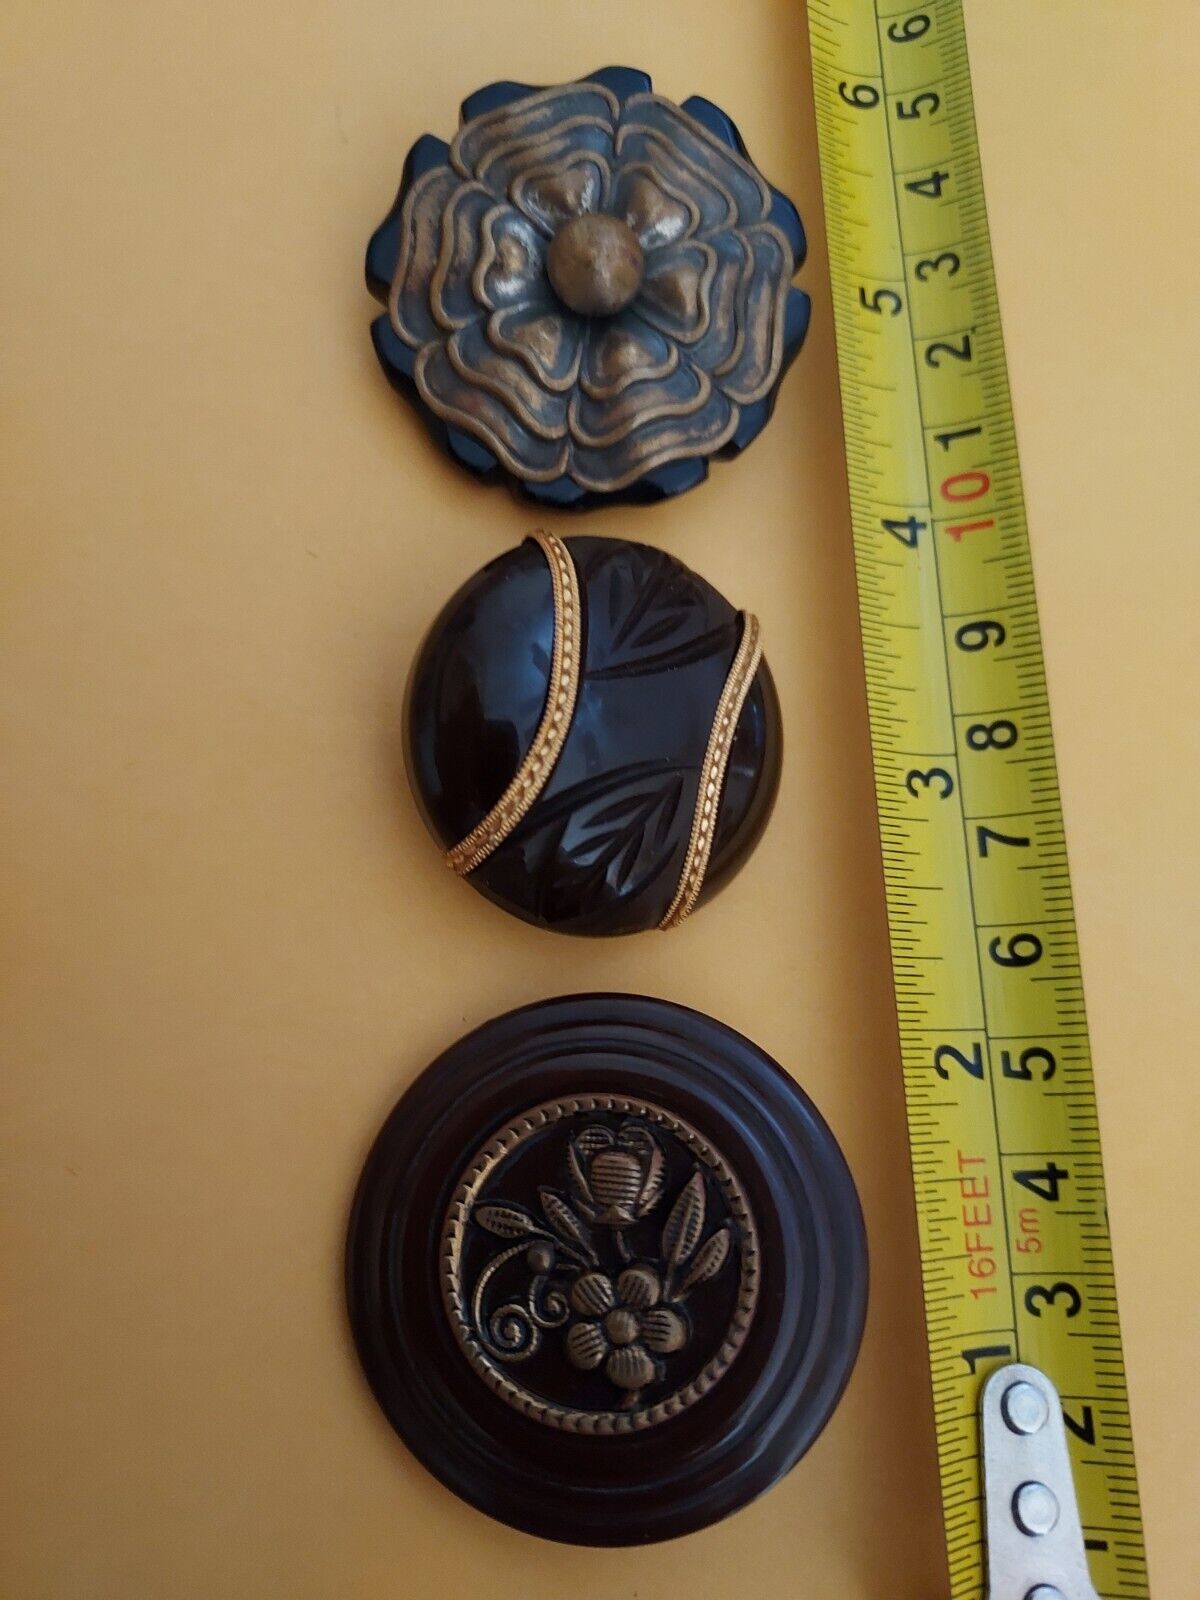 Antique Valuations: 3 Old Plastic Buttons With Metal Ornamentation